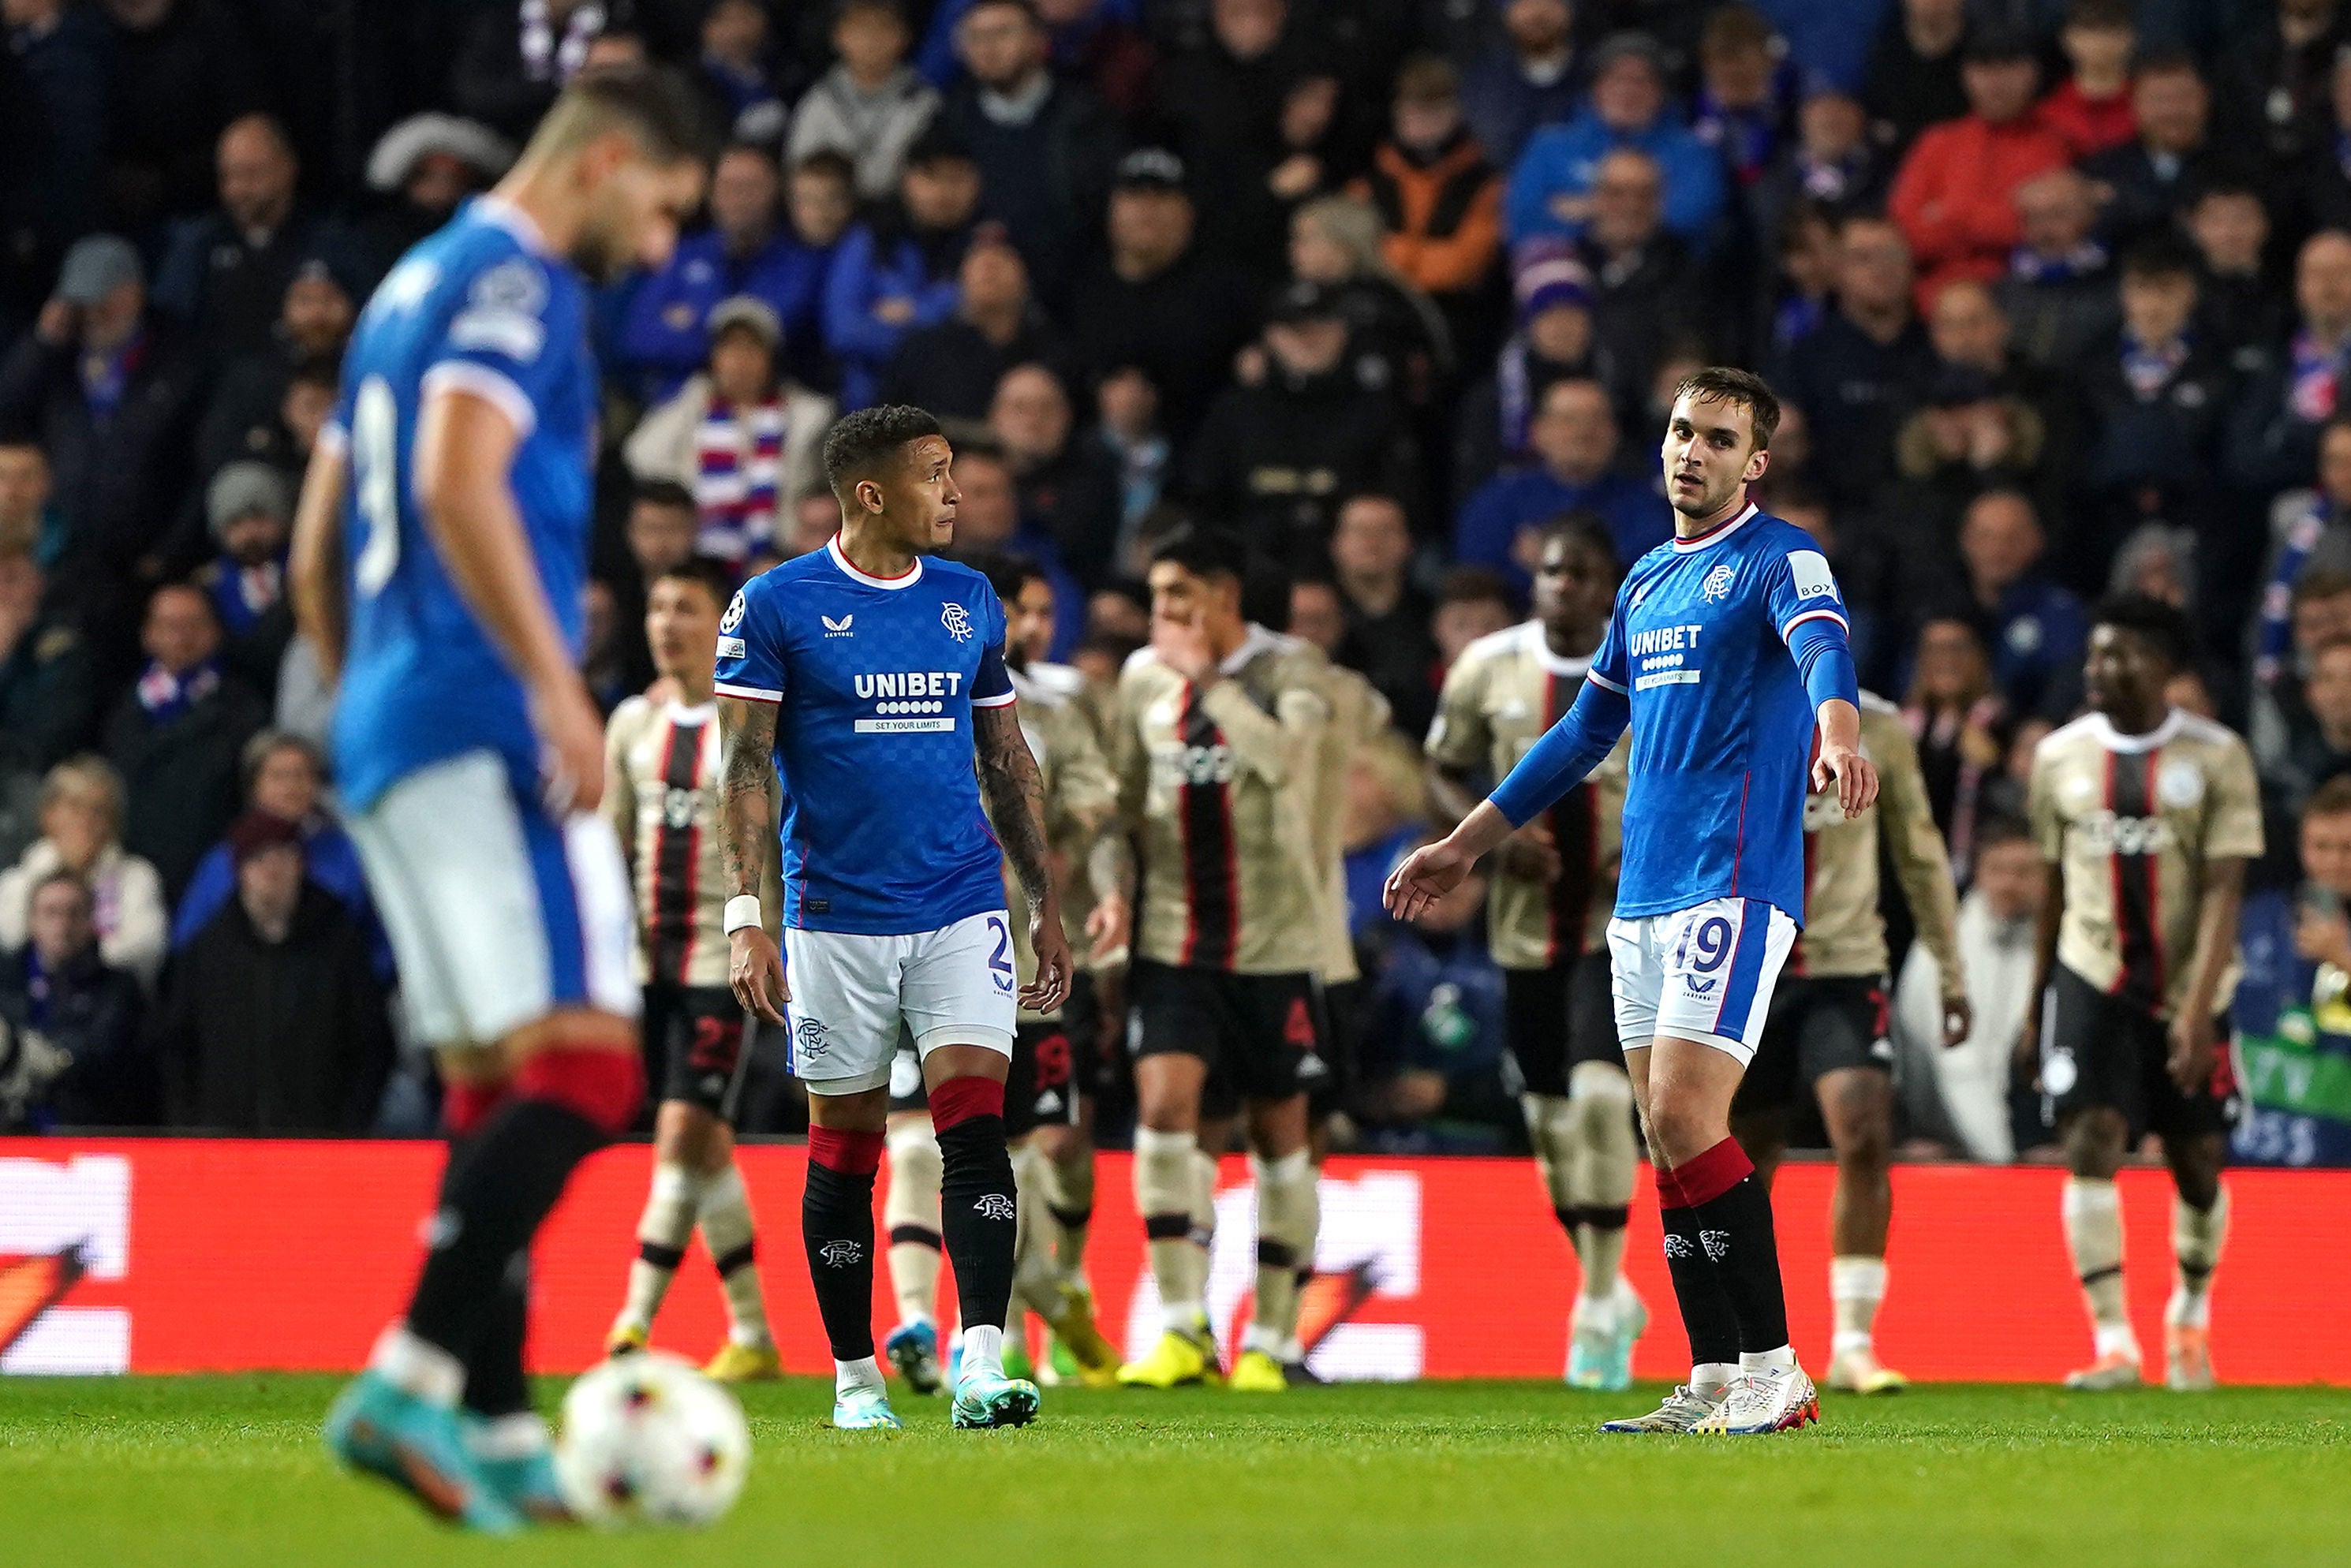 Rangers players look dejected after Ajax players celebrate their second goal